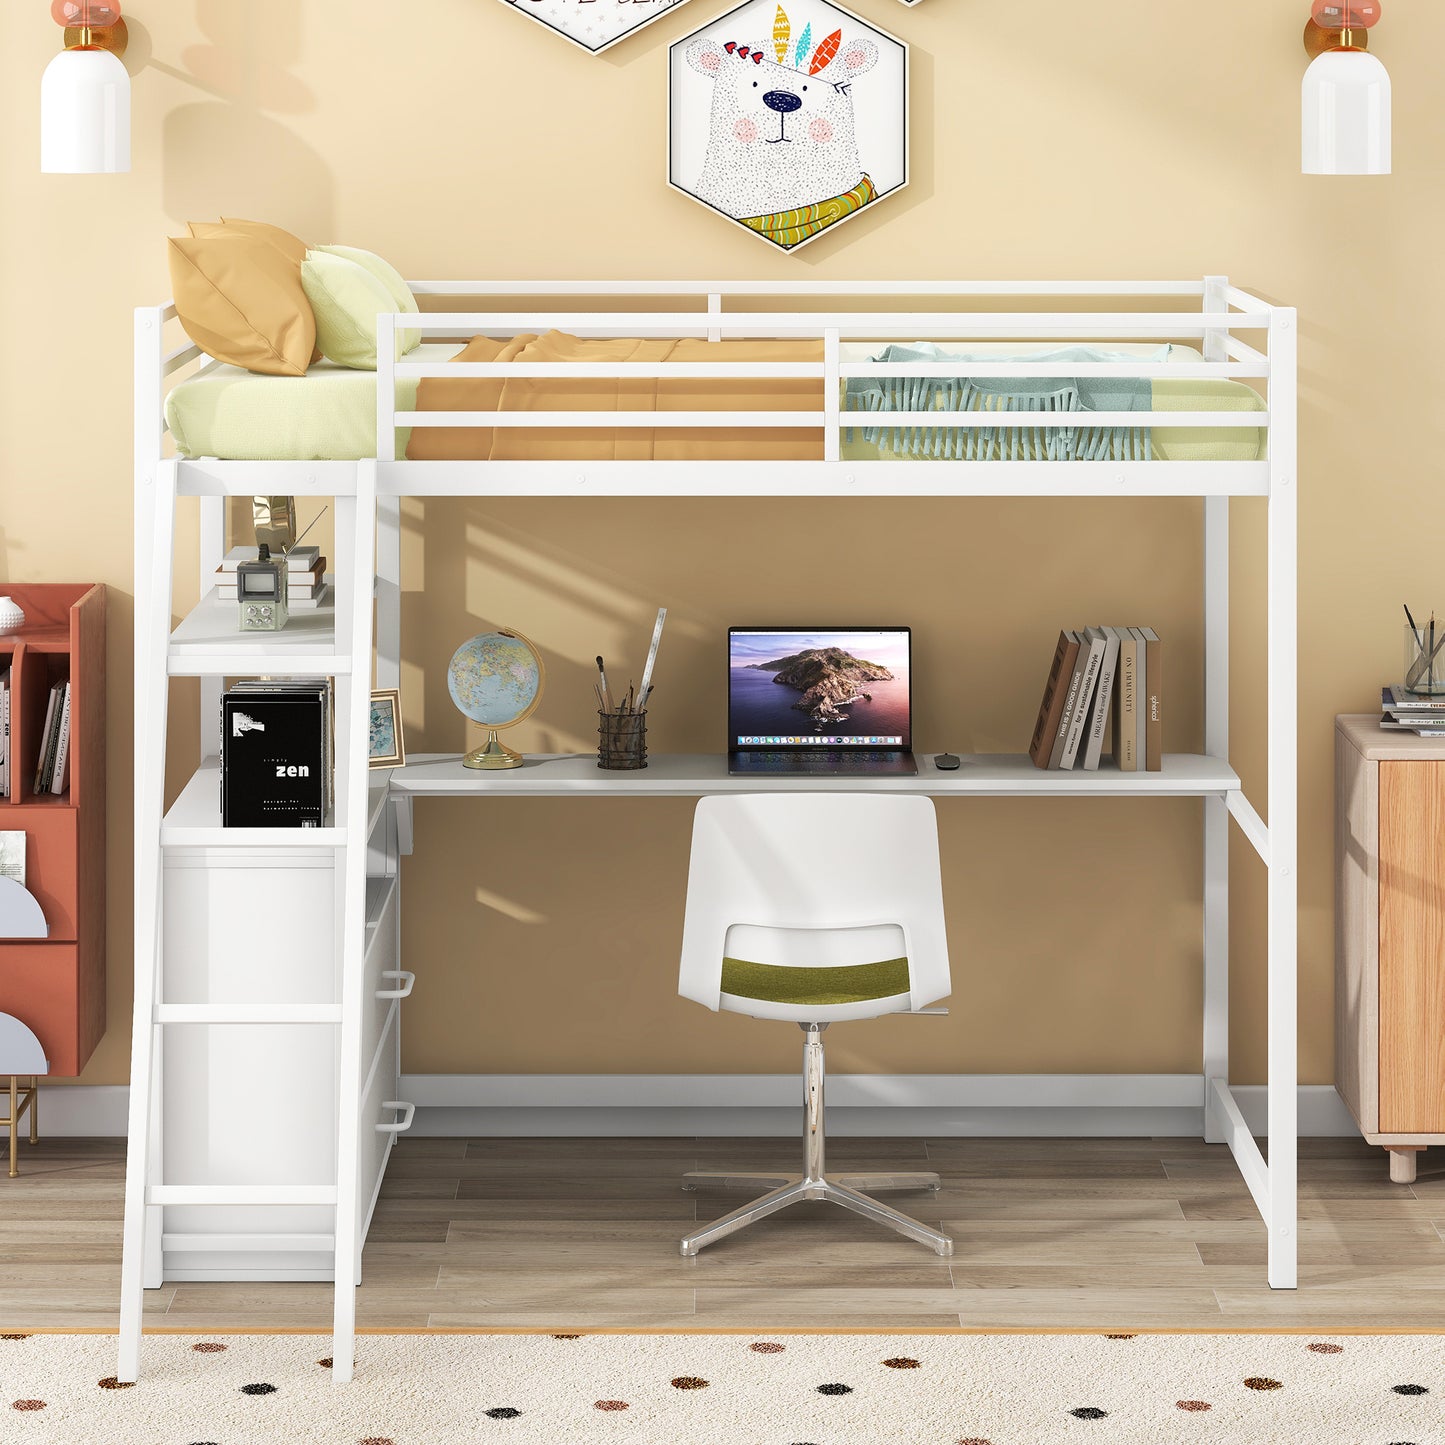 Twin Size Metal&Wood Loft Bed with Desk and Shelves, Two Built-in Drawers, White